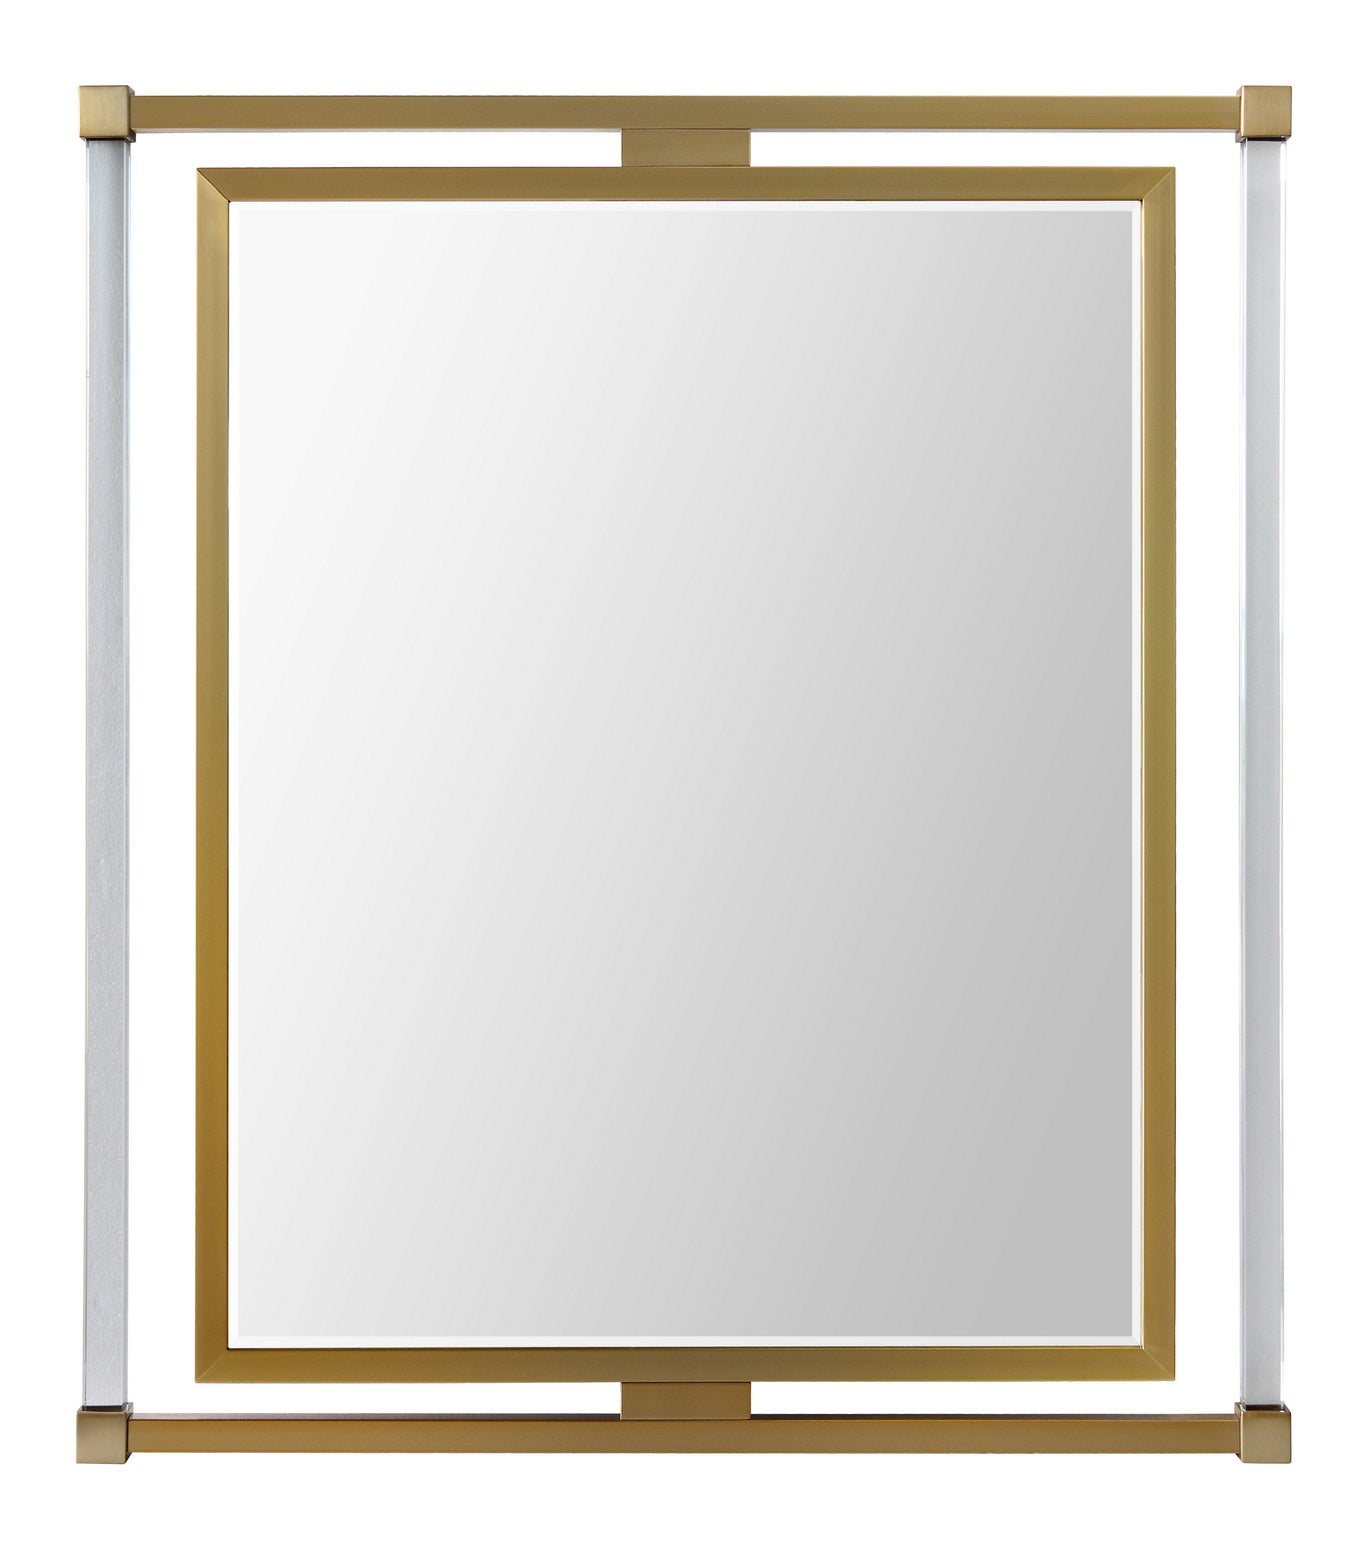 Decorative transitional mirror mad with acrylic and brass